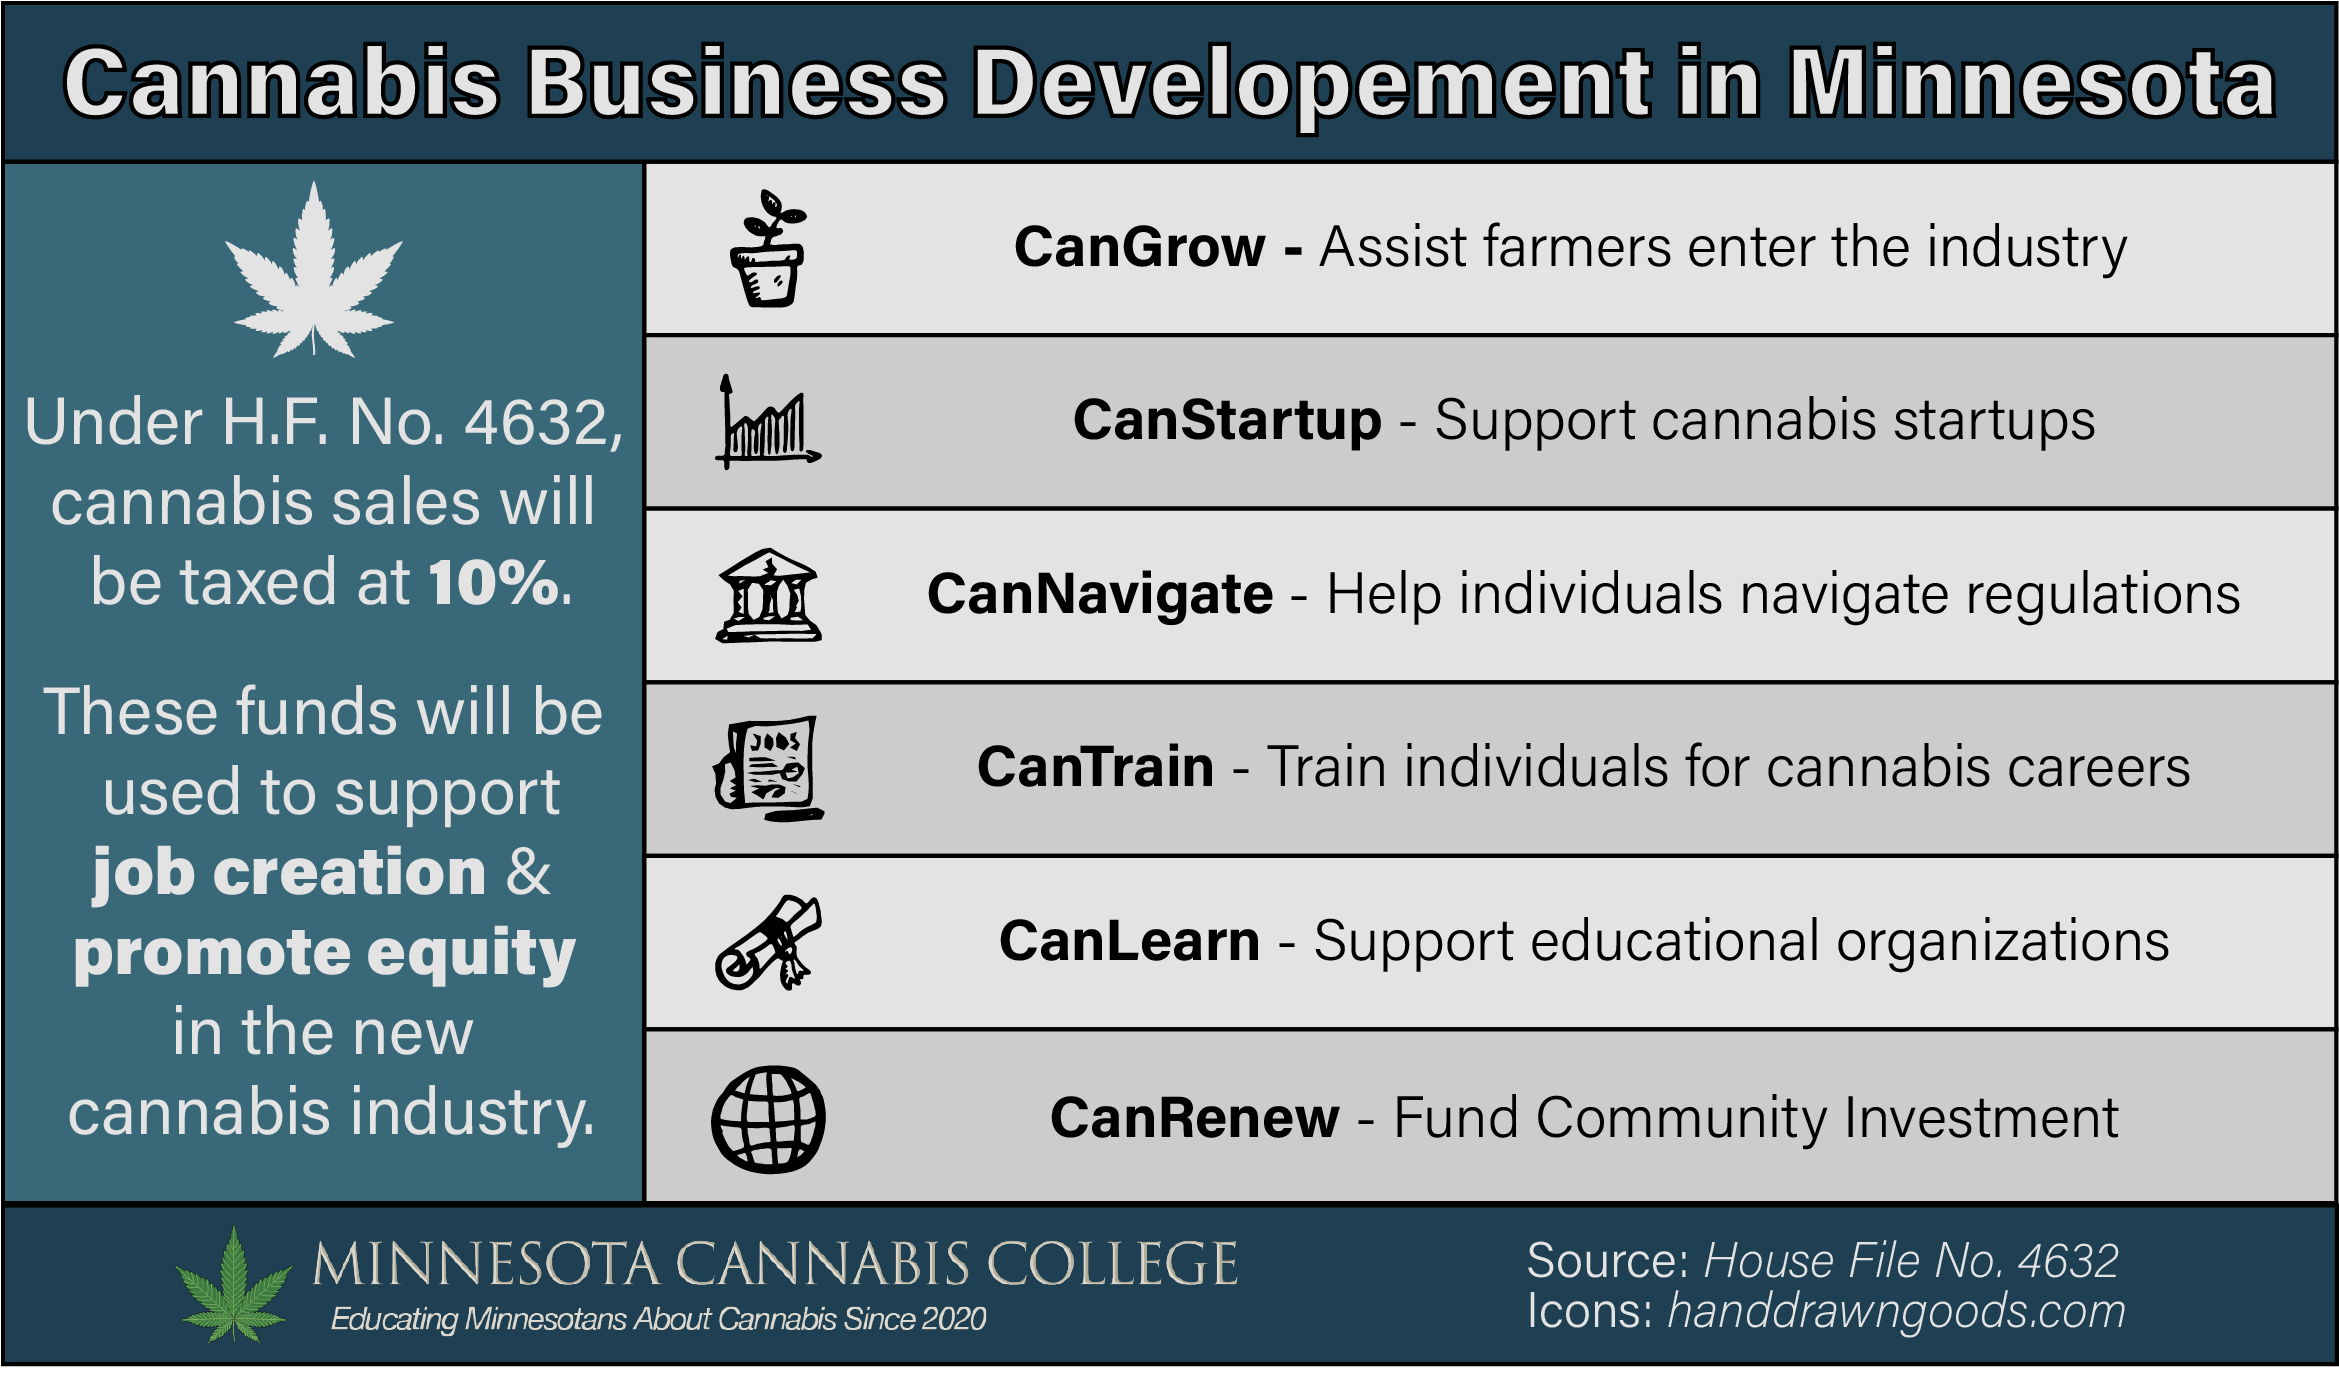 Cannabis Business Developement in Minnesota 
Under H.F. No. 4632, 
cannabis sales will 
be taxed at 10%. 
These funds will be 
used to support 
job creation & 
promote equity 
in the new 
cannabis industry. 
CanGrow - Assist farmers enter the industry 
CanStartup - Support cannabis startups 
CanNavigate - Help individuals navigate regulations 
CanTrain - Train individuals for cannabis careers 
CanLearn - Support educational organizations 
CanRenew - Fund Community Investment 
stg 
MINNESOTA CANNABIS COLLEGE 
Educating Minnesotans About Cannabis Since 2020 
Source: House File No, 4632 
Icons: handdrawngoods.com 